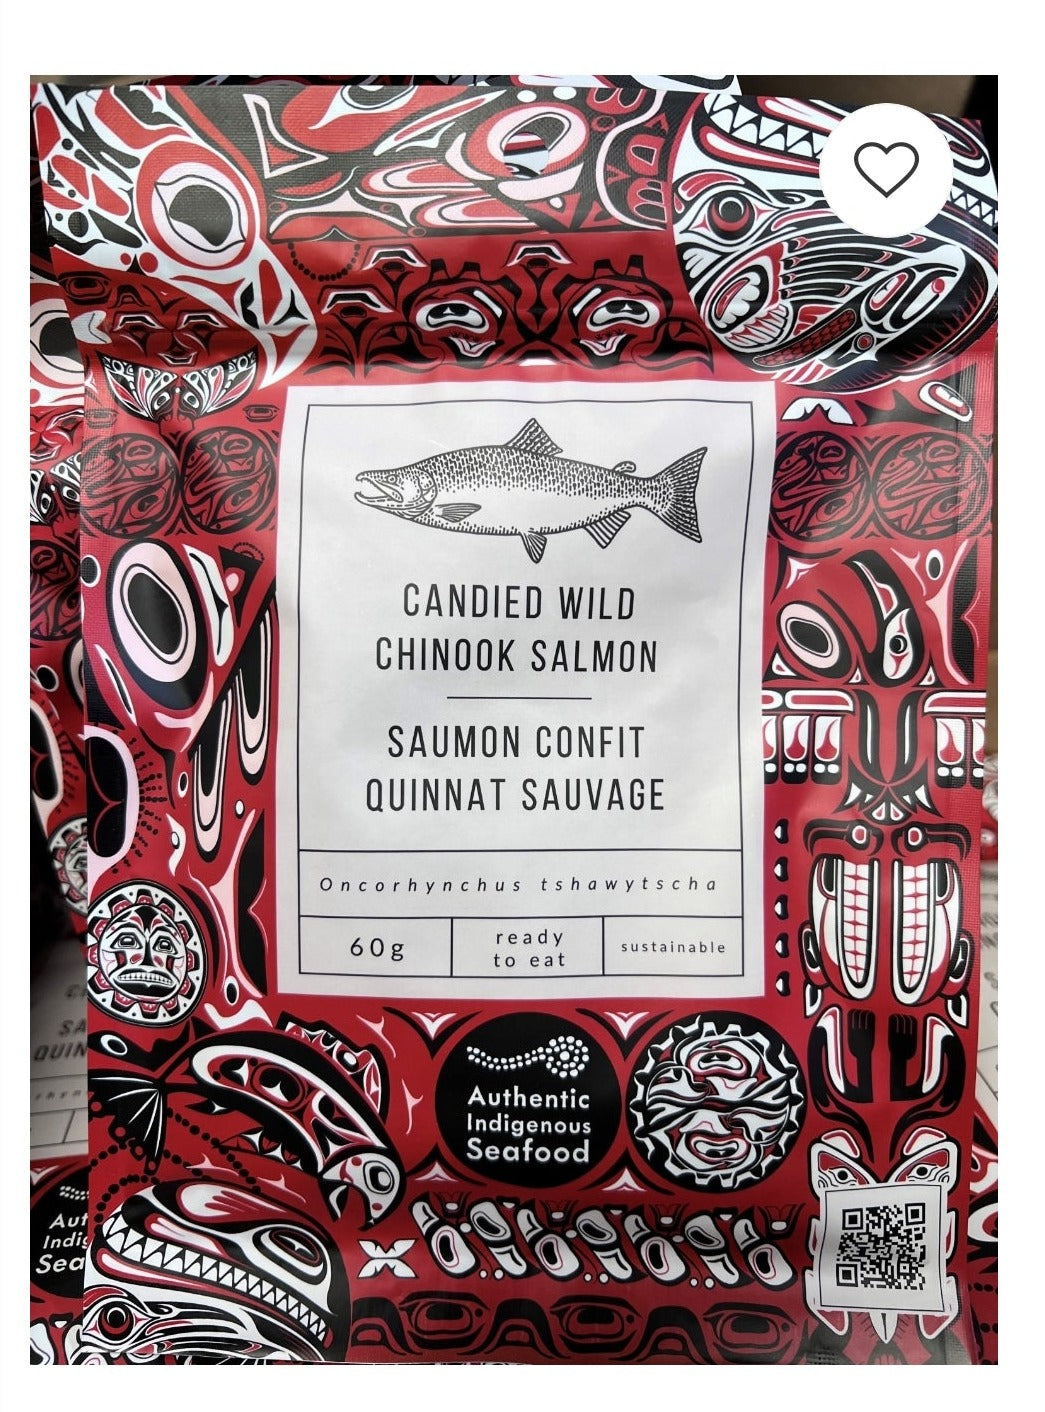 River Select - Candied Wild Pink Salmon